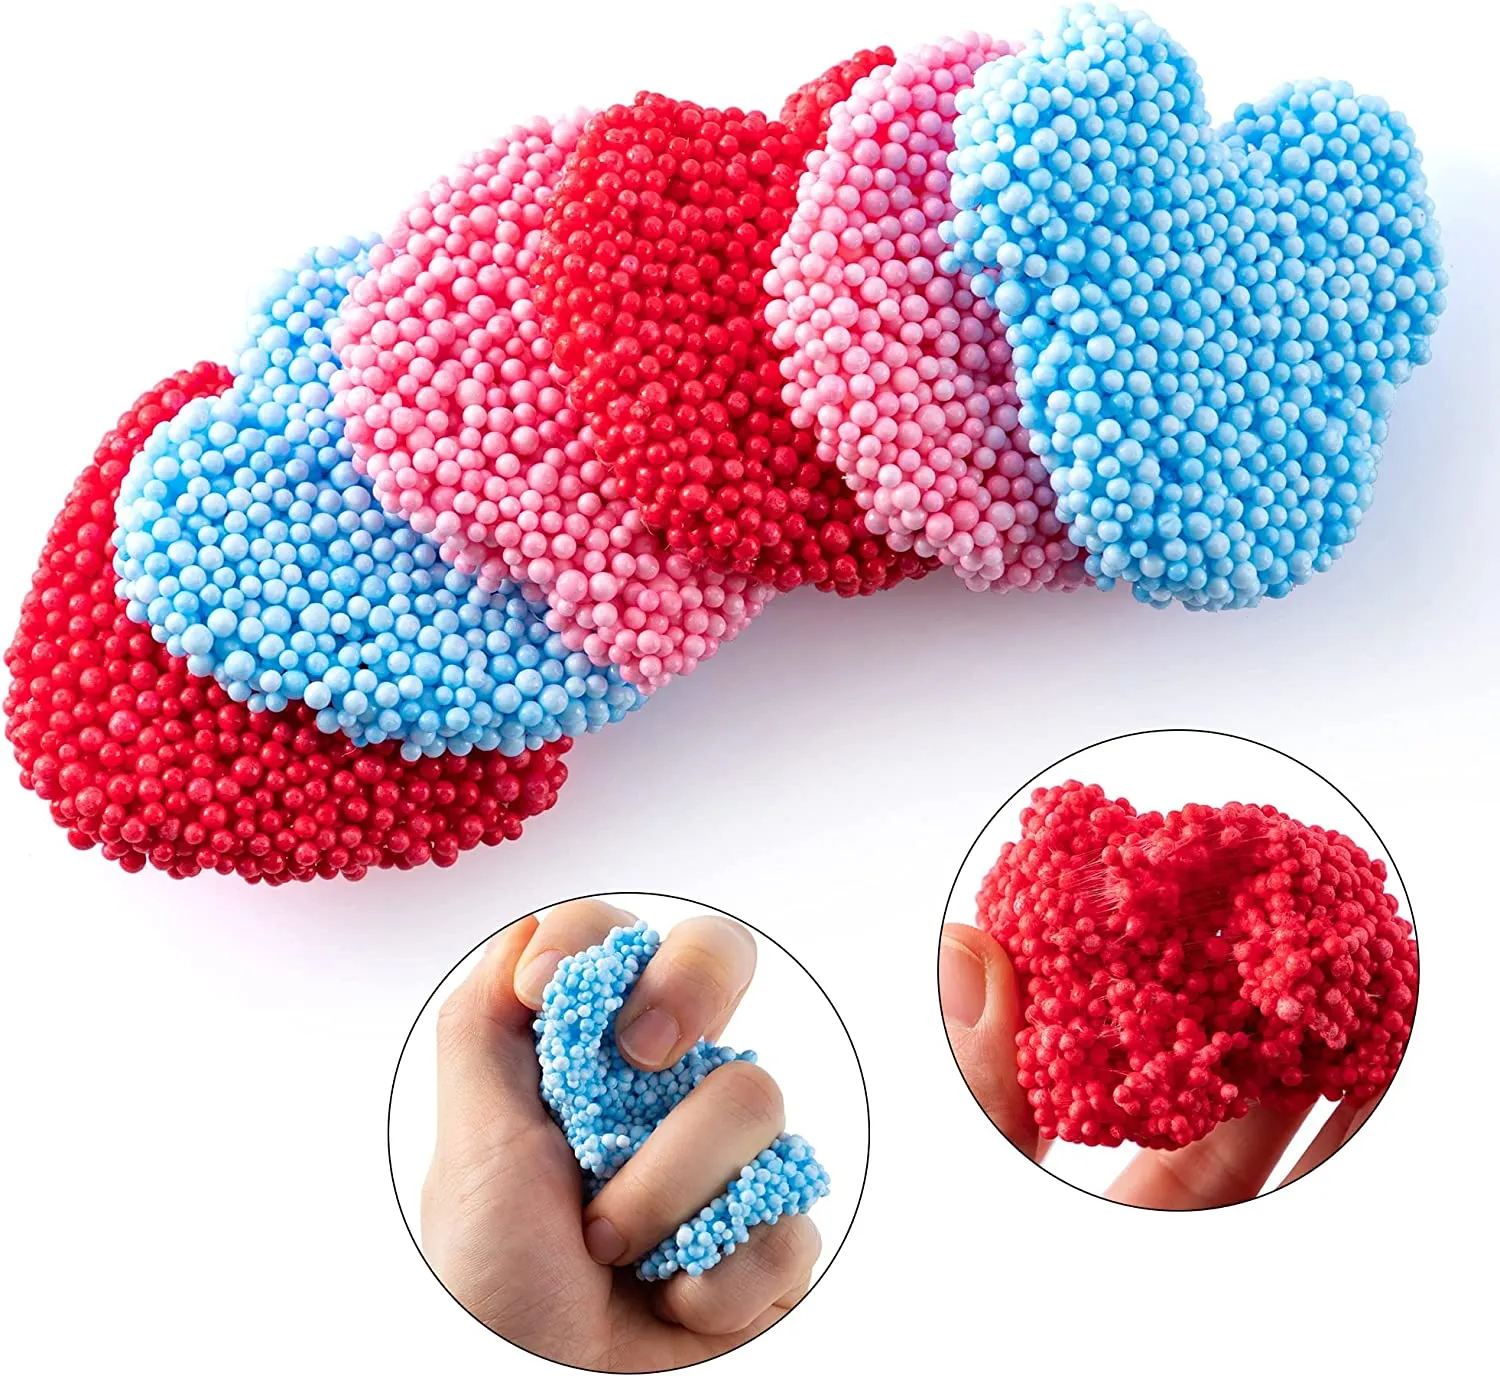 JOYIN 12 Pcs Valentine's Day Foam Squishy with Cards, Squishy Fun Foam Modeling Foam for Valentine Party Favors, Gift Exchange and Game Prizes